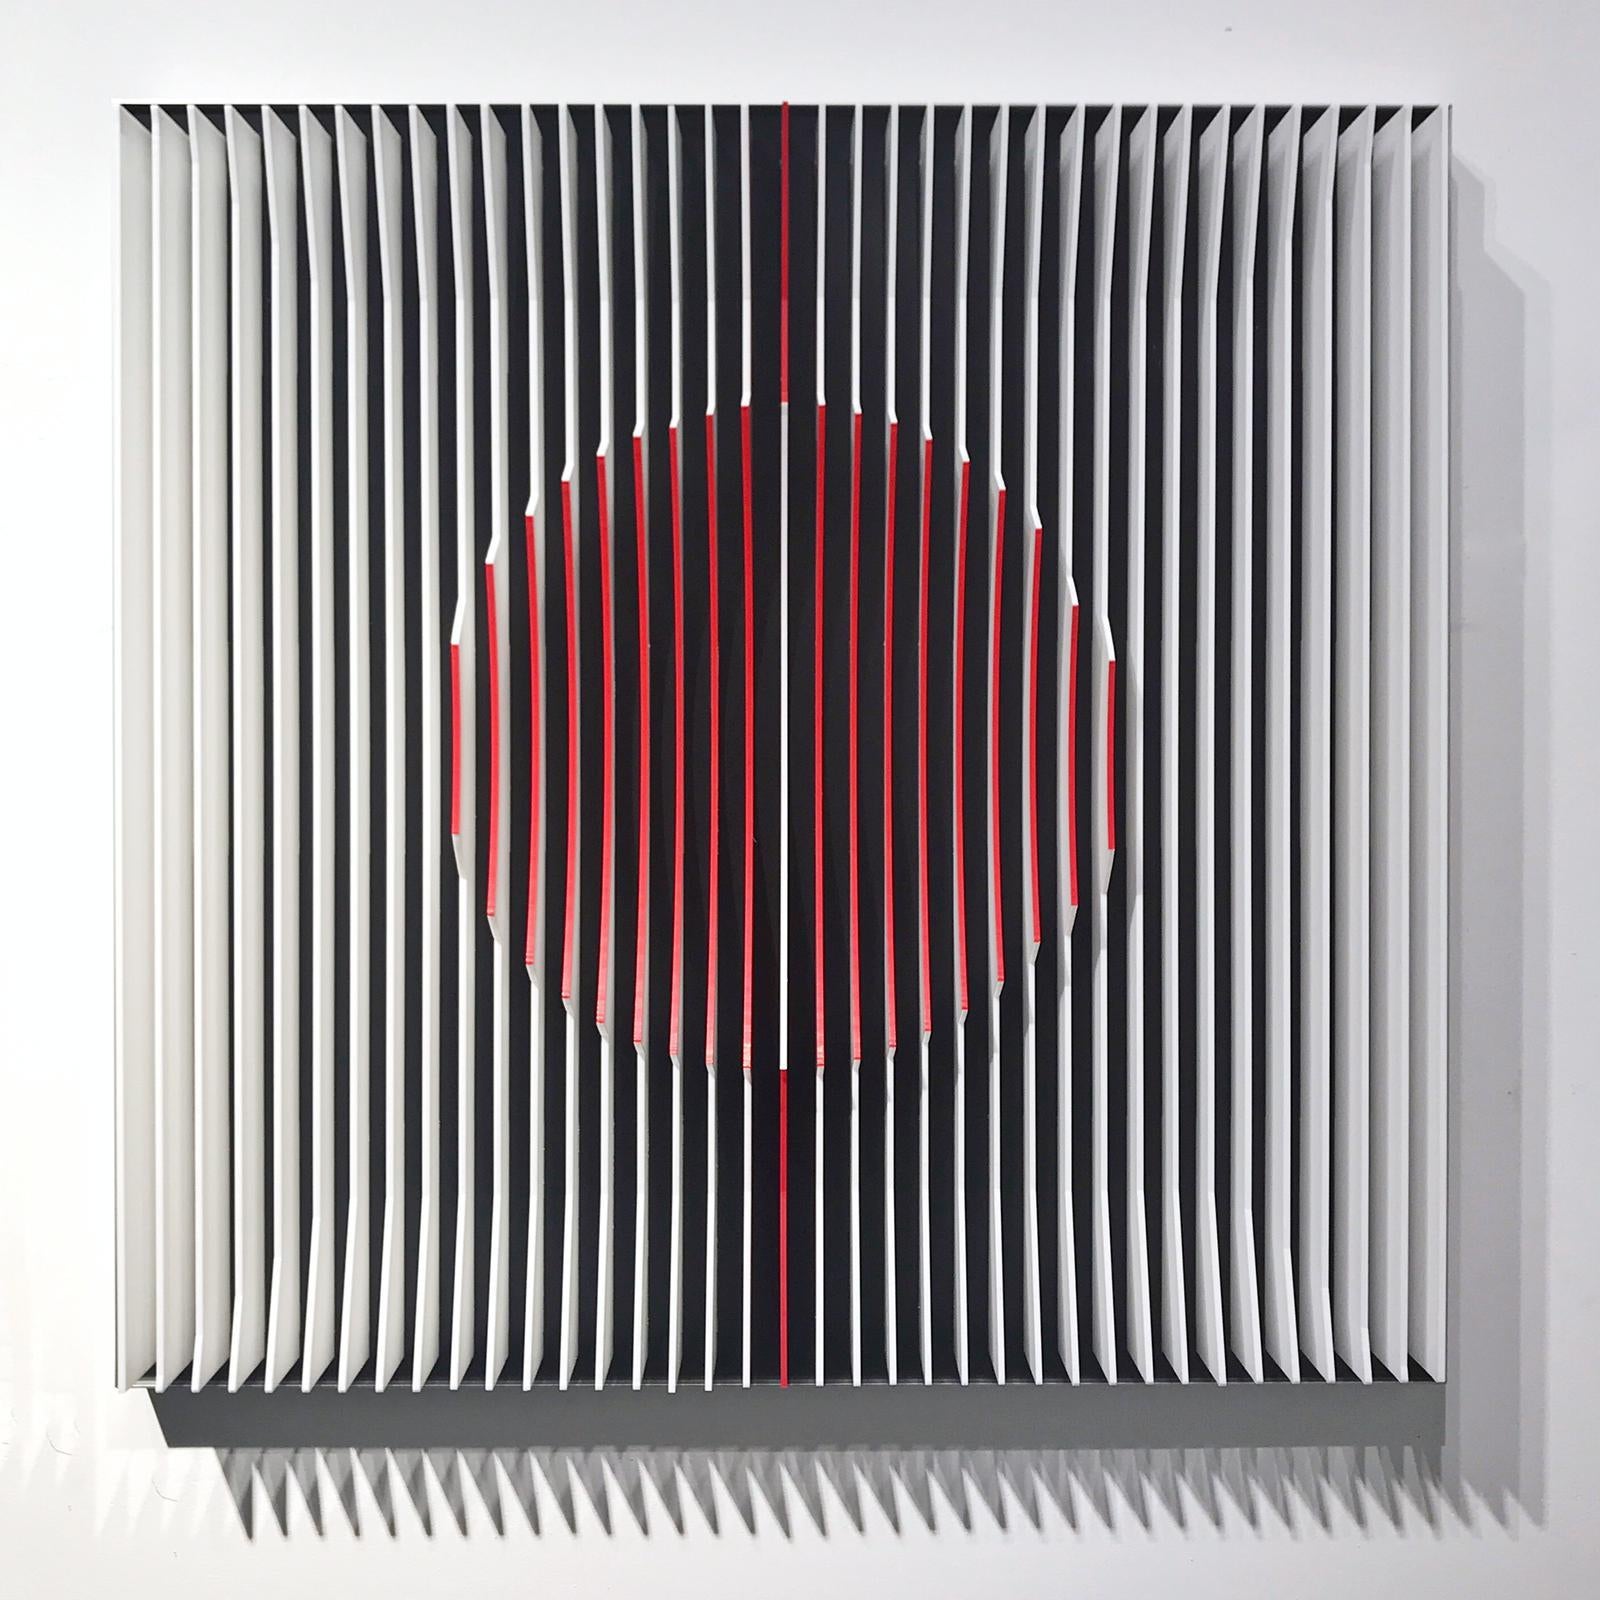 Red filled Moons - kinetic wall sculpture by J. Margulis - Gray Abstract Sculpture by Jose Margulis